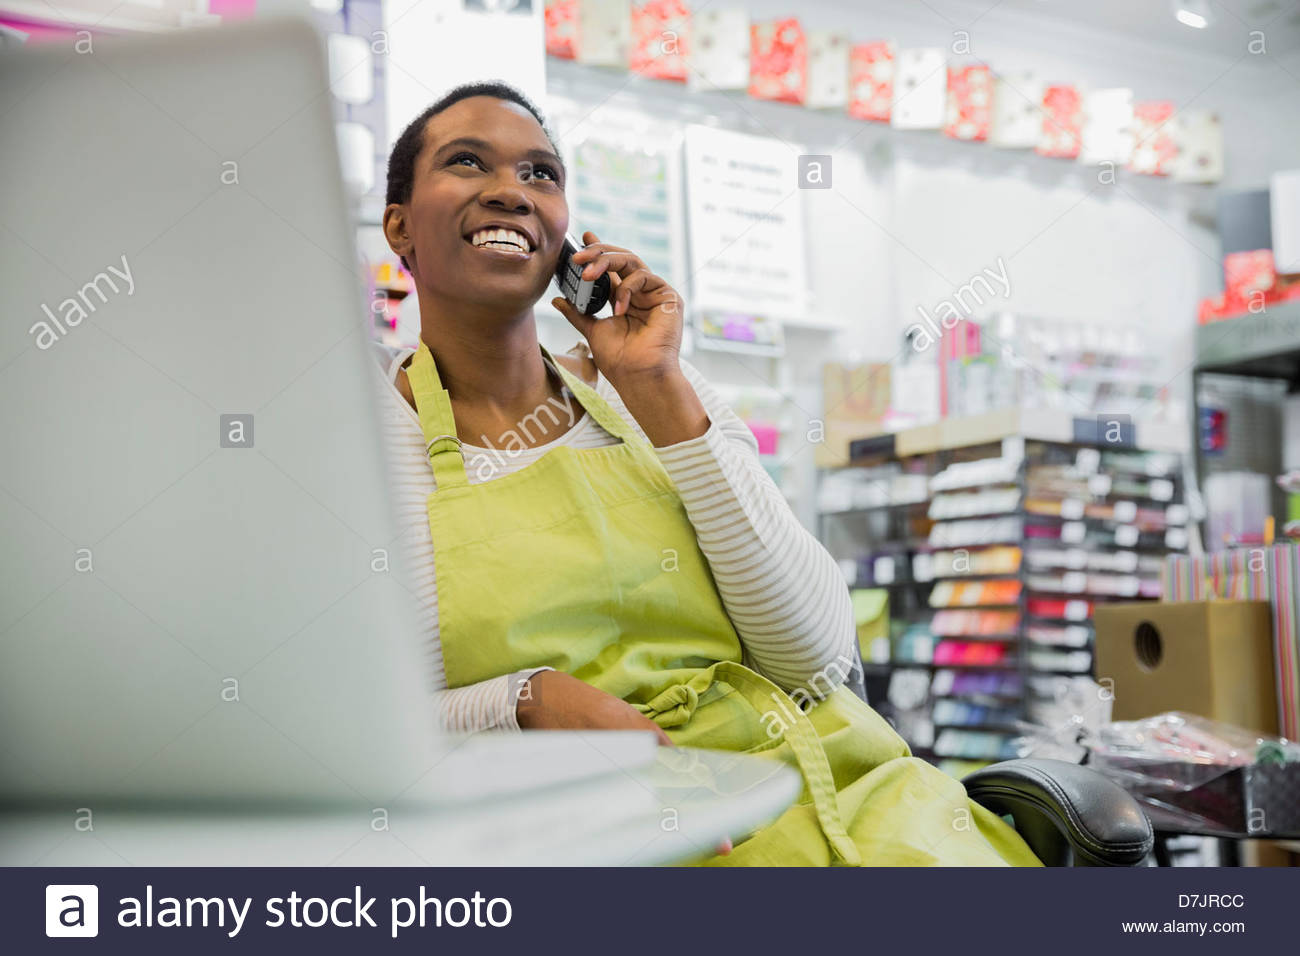 Female small business owner talking on phone in store Stock Photo